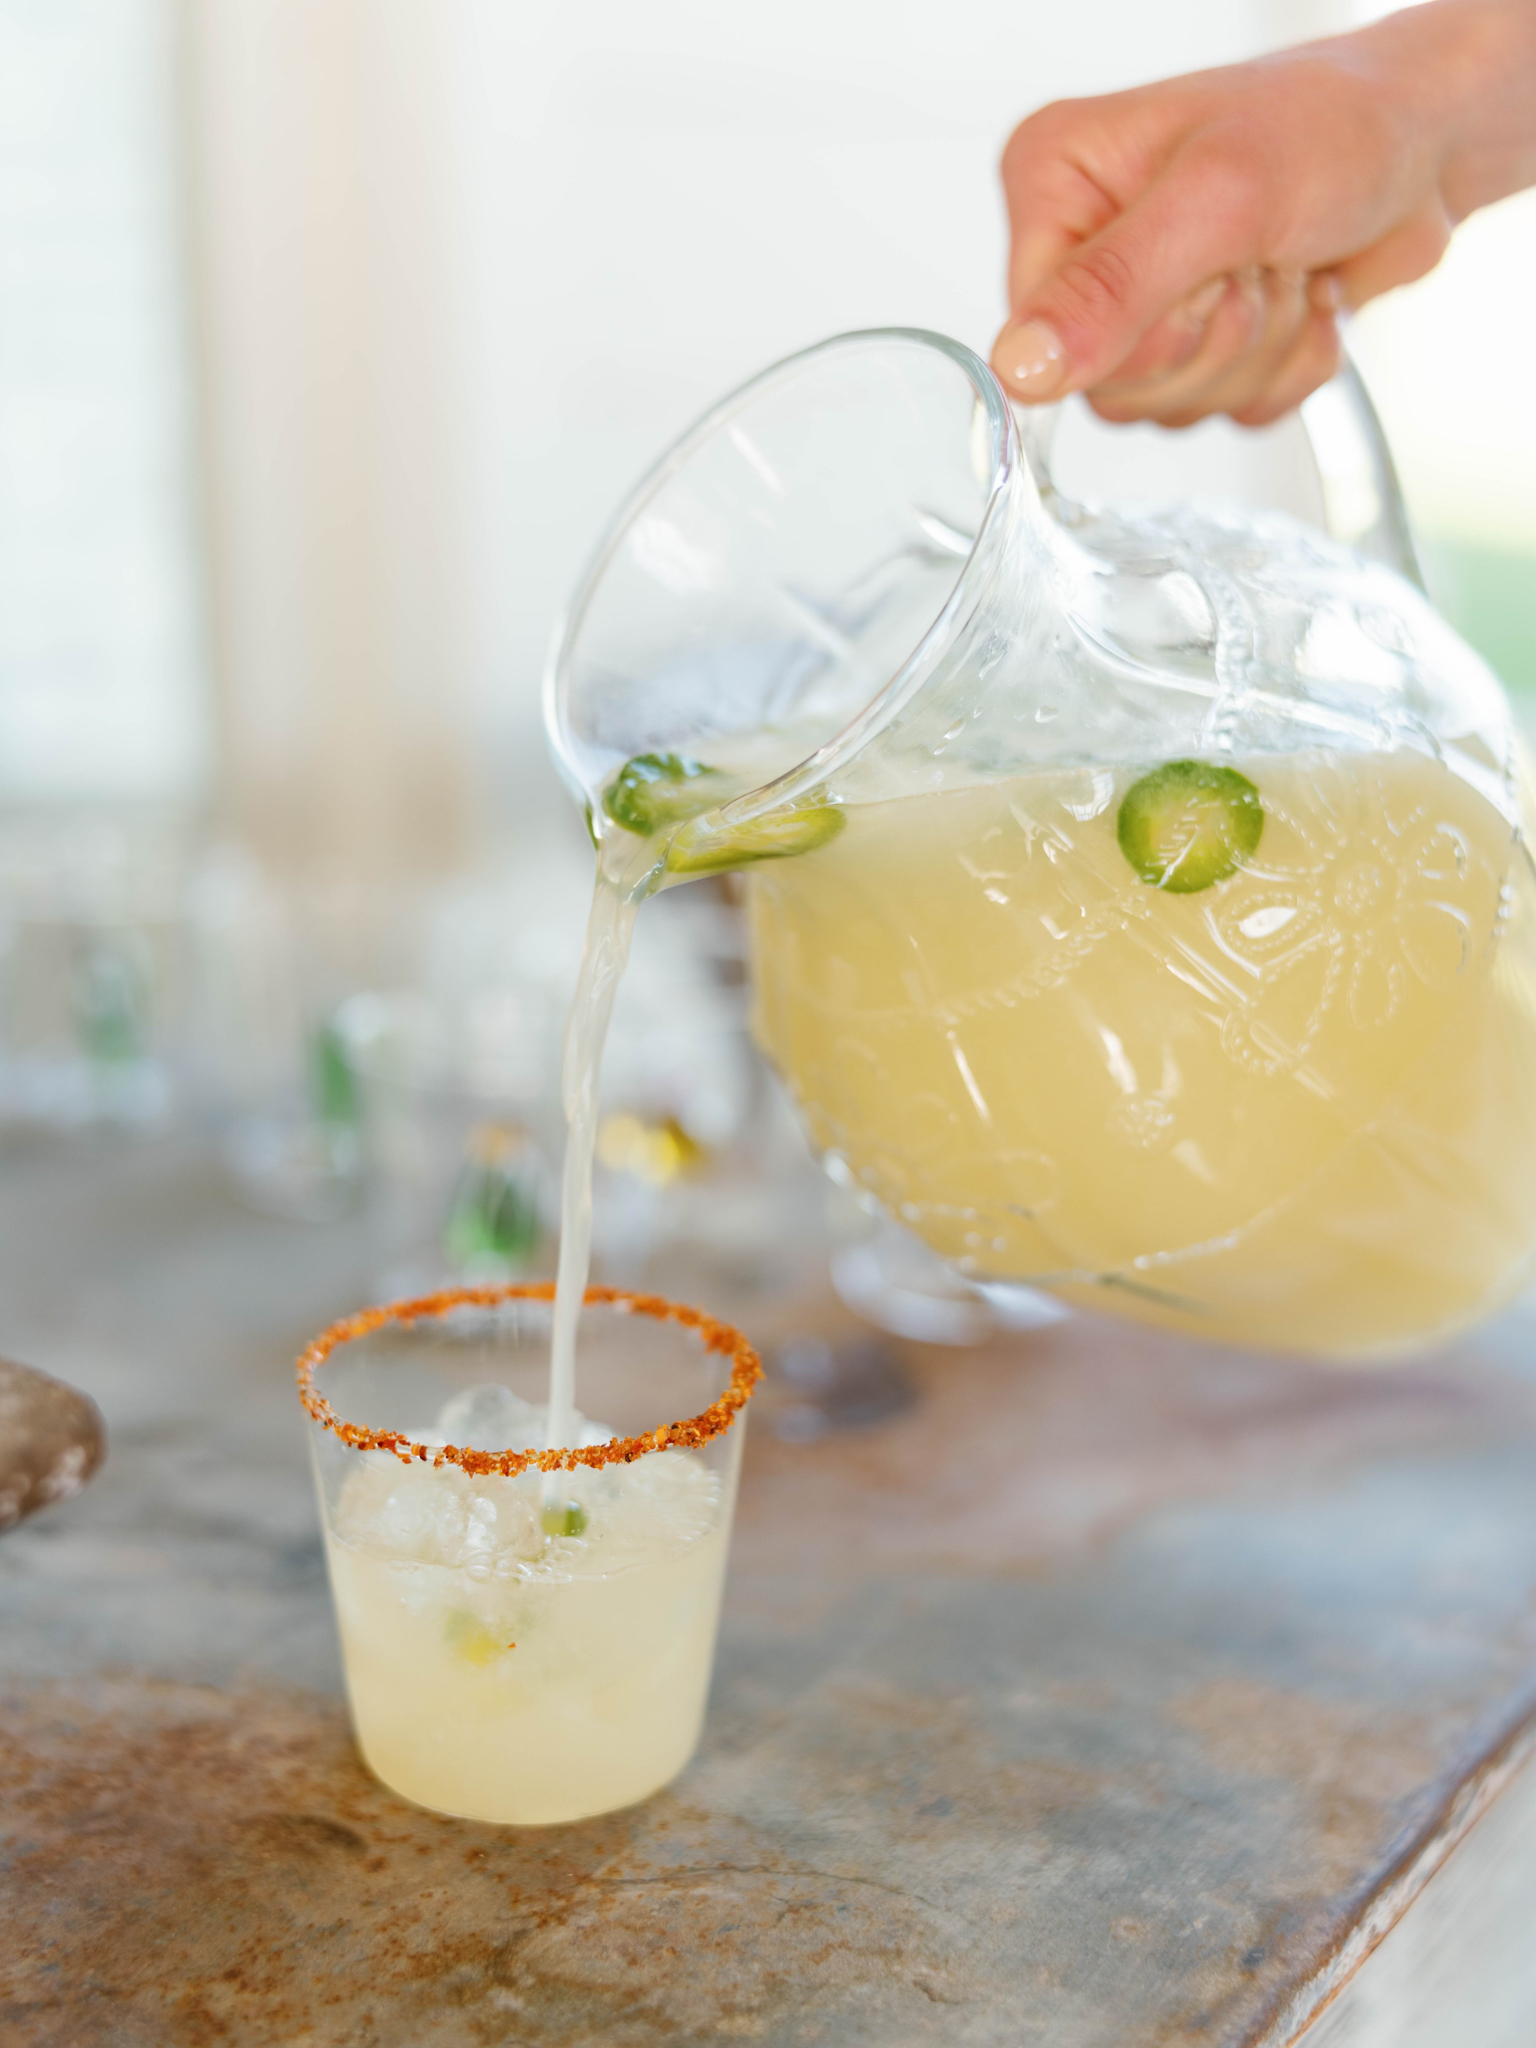 Quick and Easy Pitcher of Margaritas for a Party